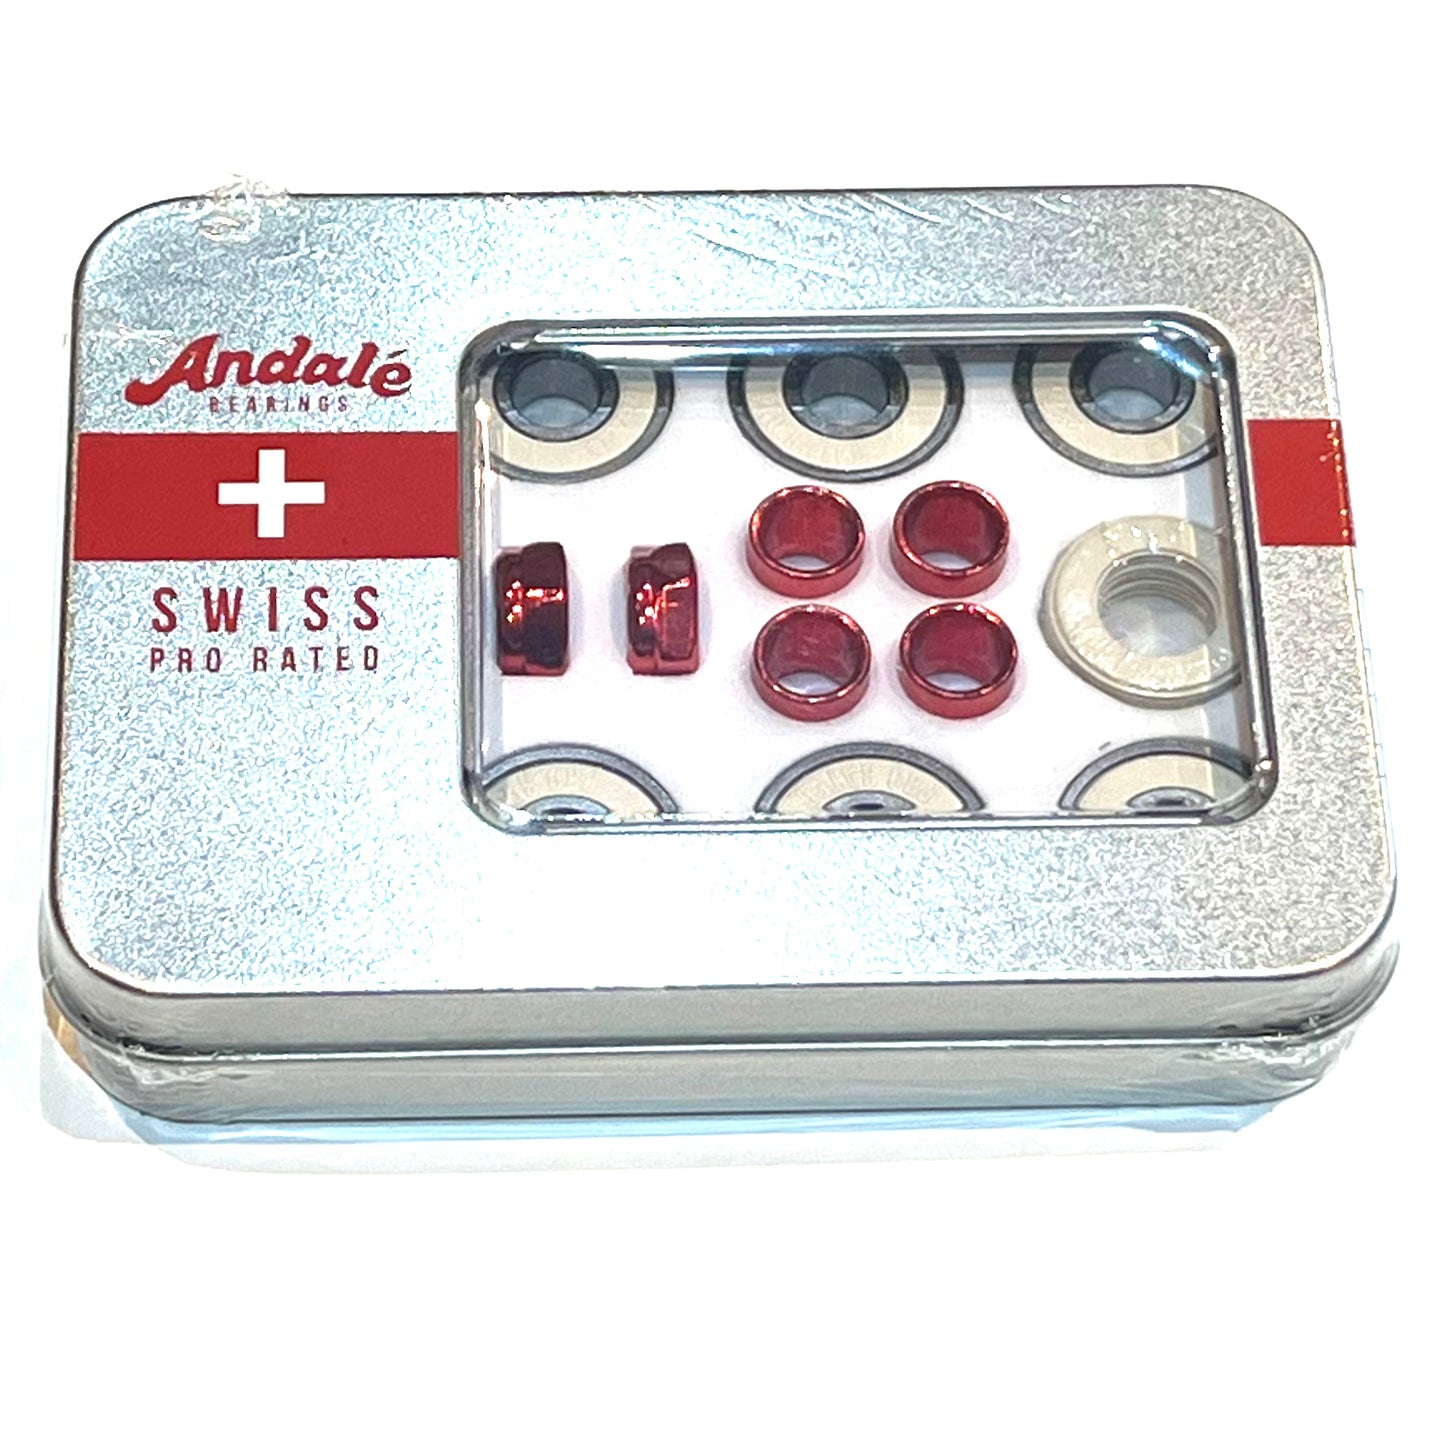 Andale BEARINGS SWISS PRO RATED